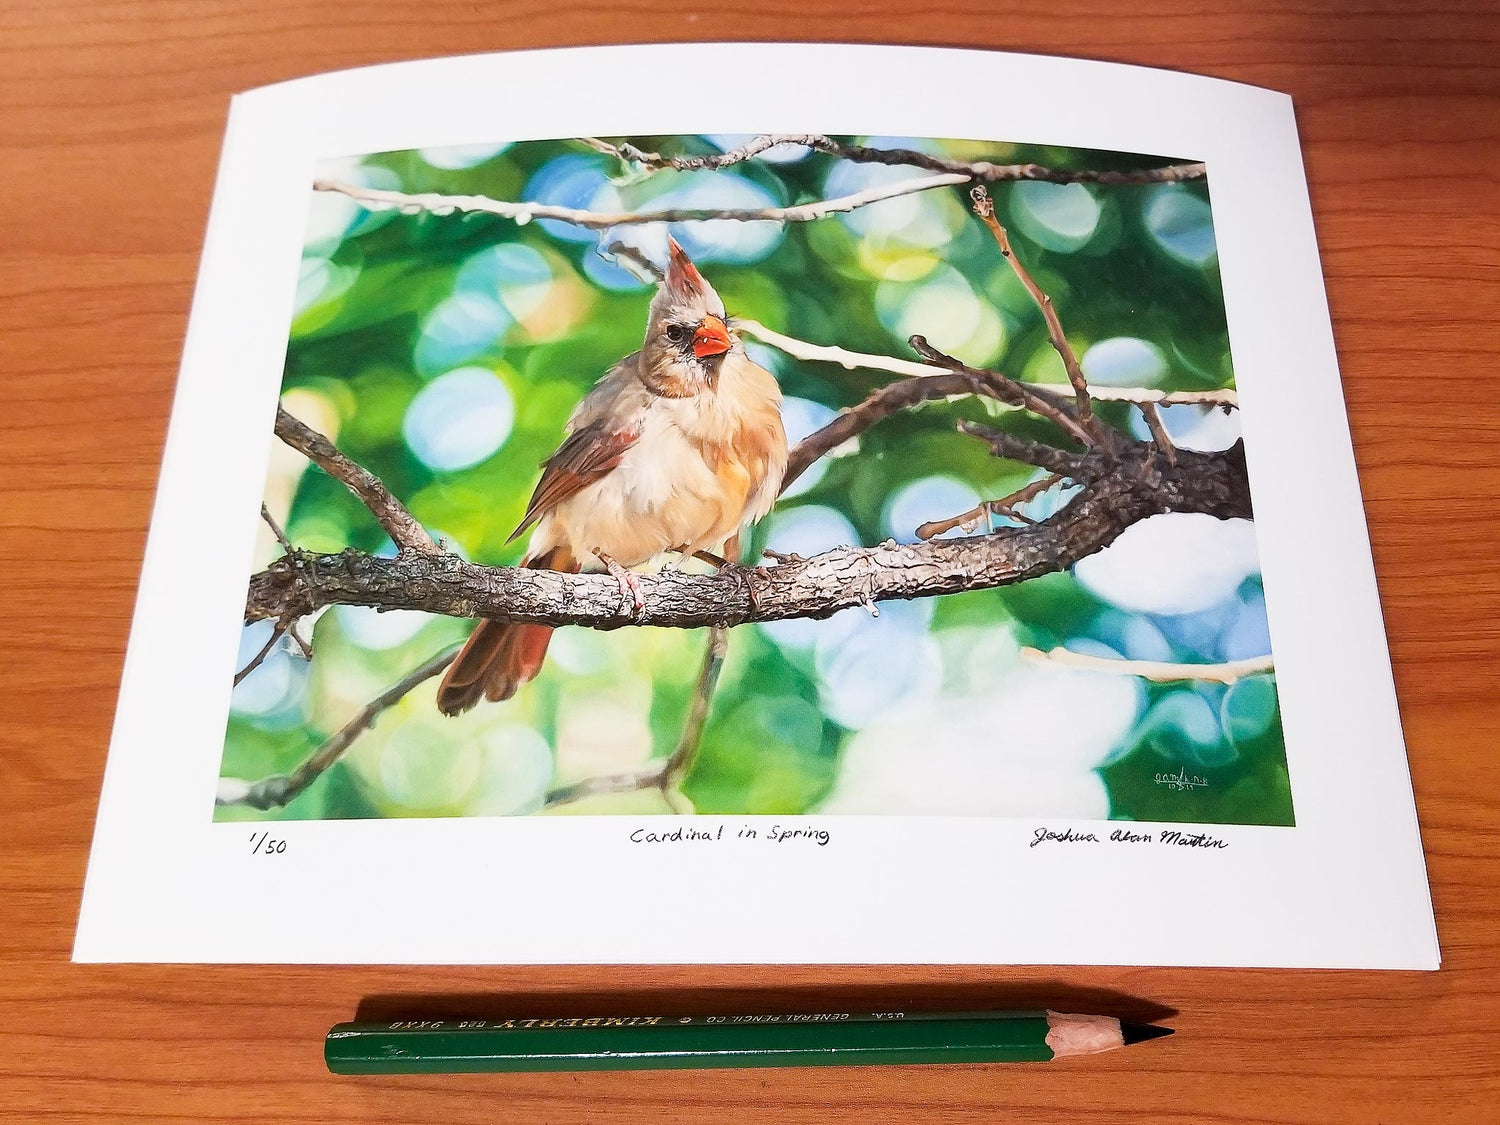 Signed fine art print by artist Joshua Martin of Cardinal in Spring.